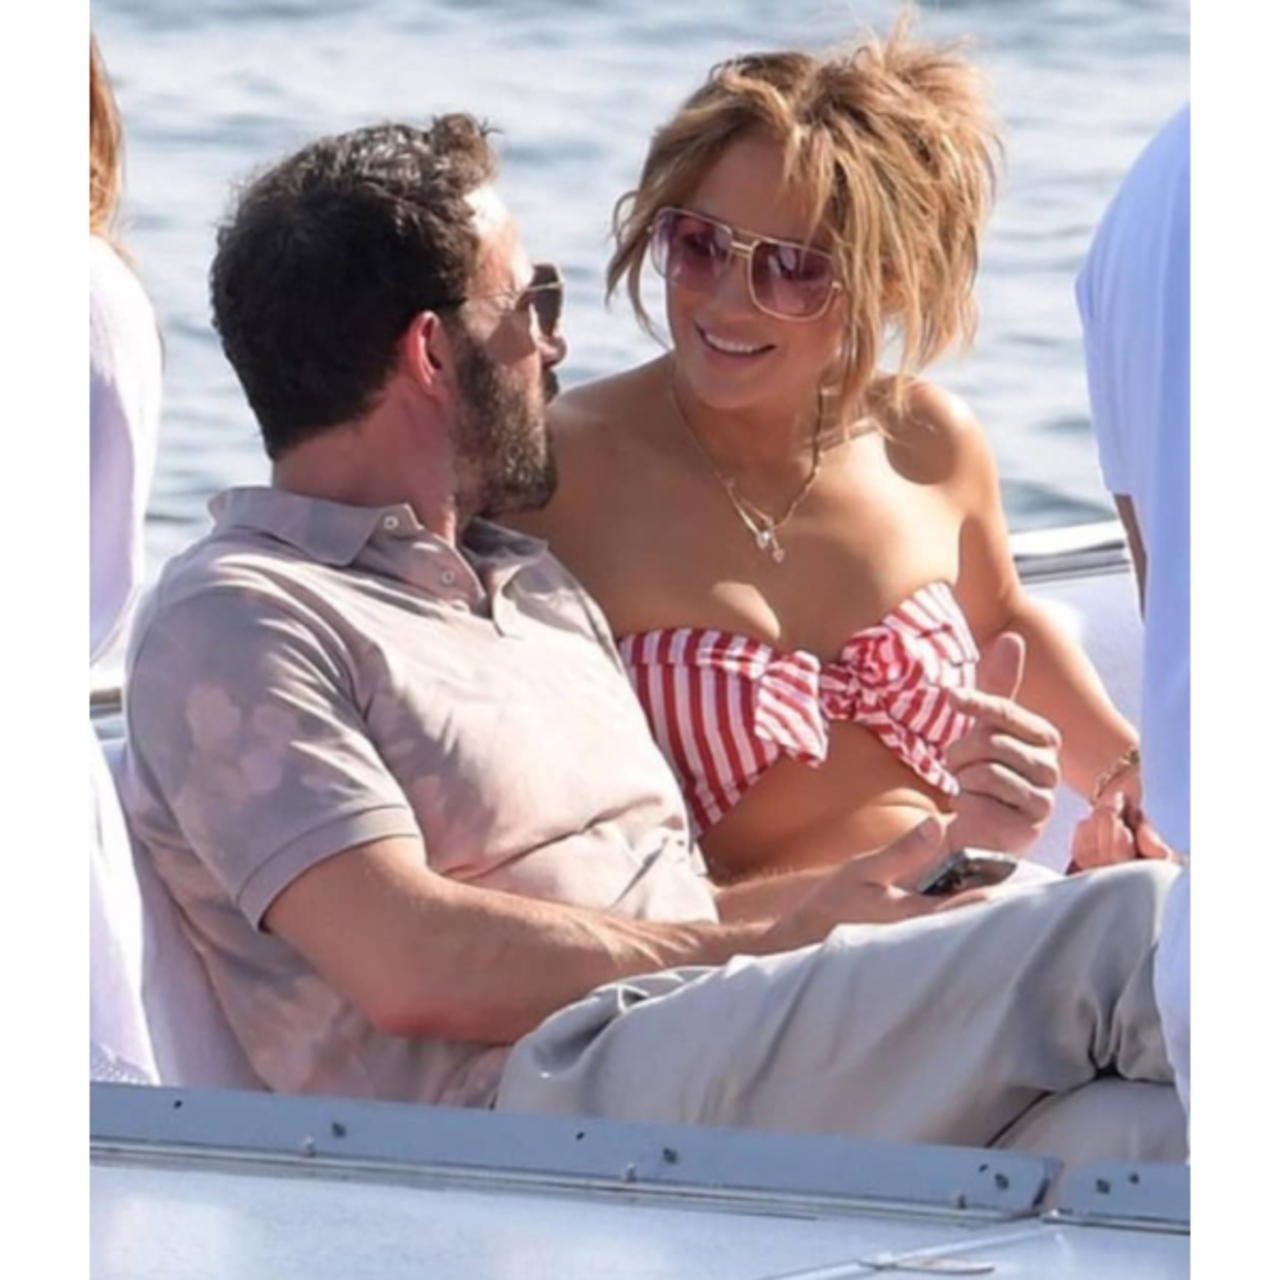 Jennifer Lopez And Ben Afflecks Latest Cuddling Giggling And Kissing Pictures Prove They Are